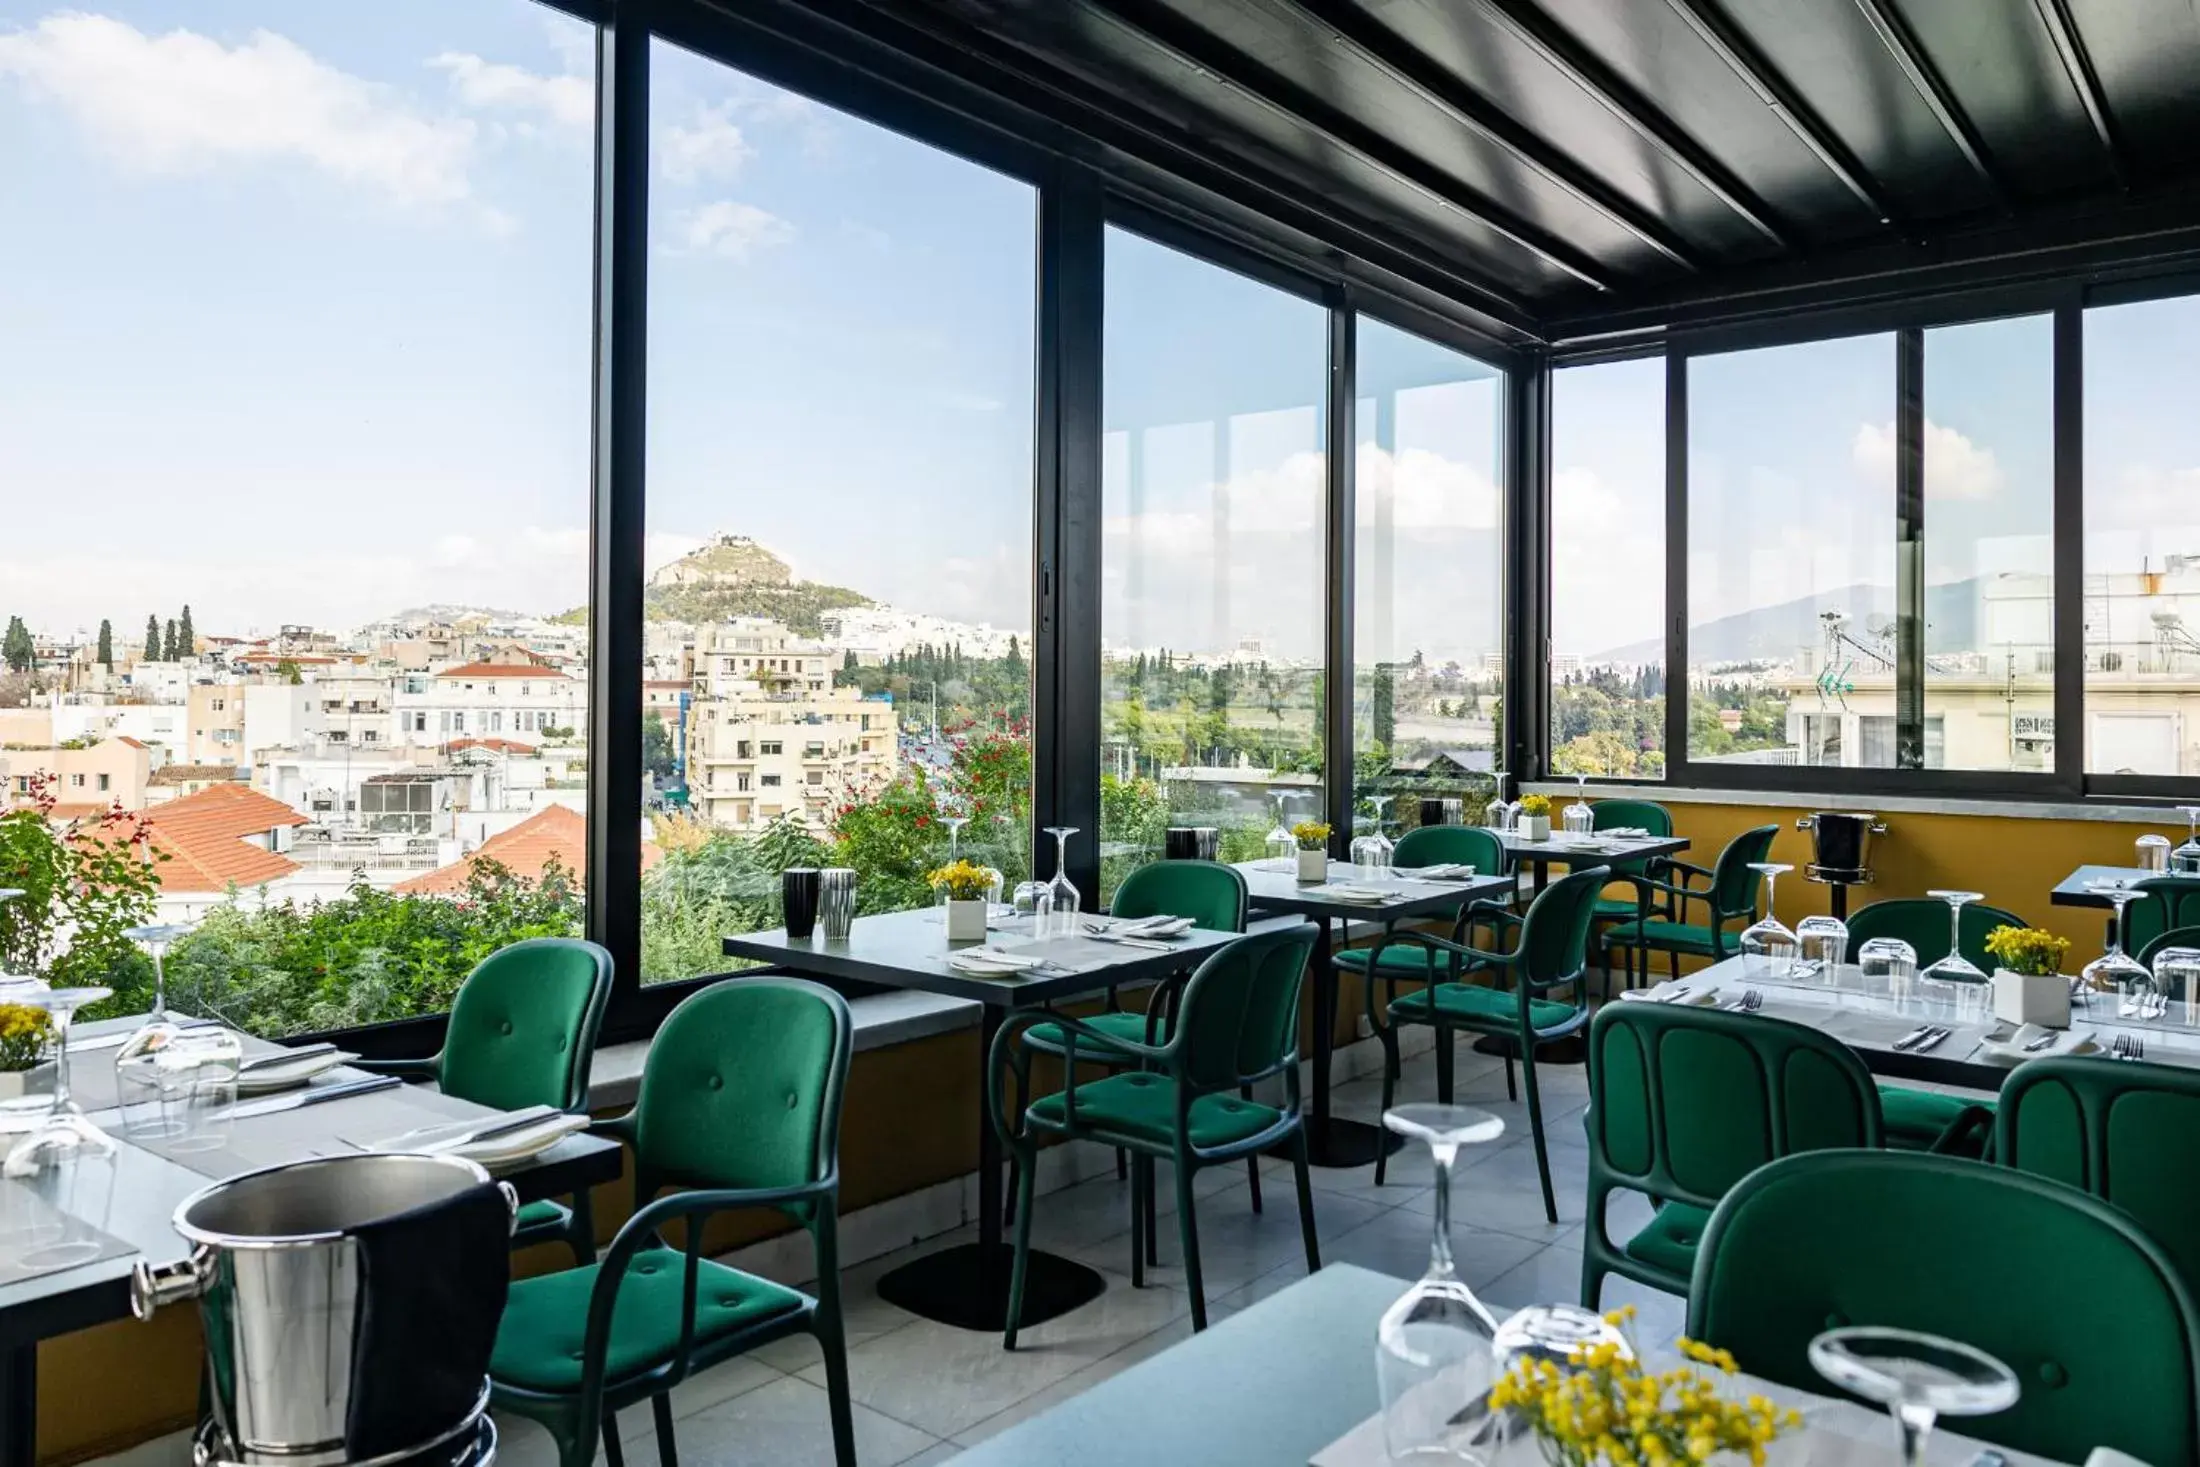 Restaurant/Places to Eat in AthensWas Design Hotel